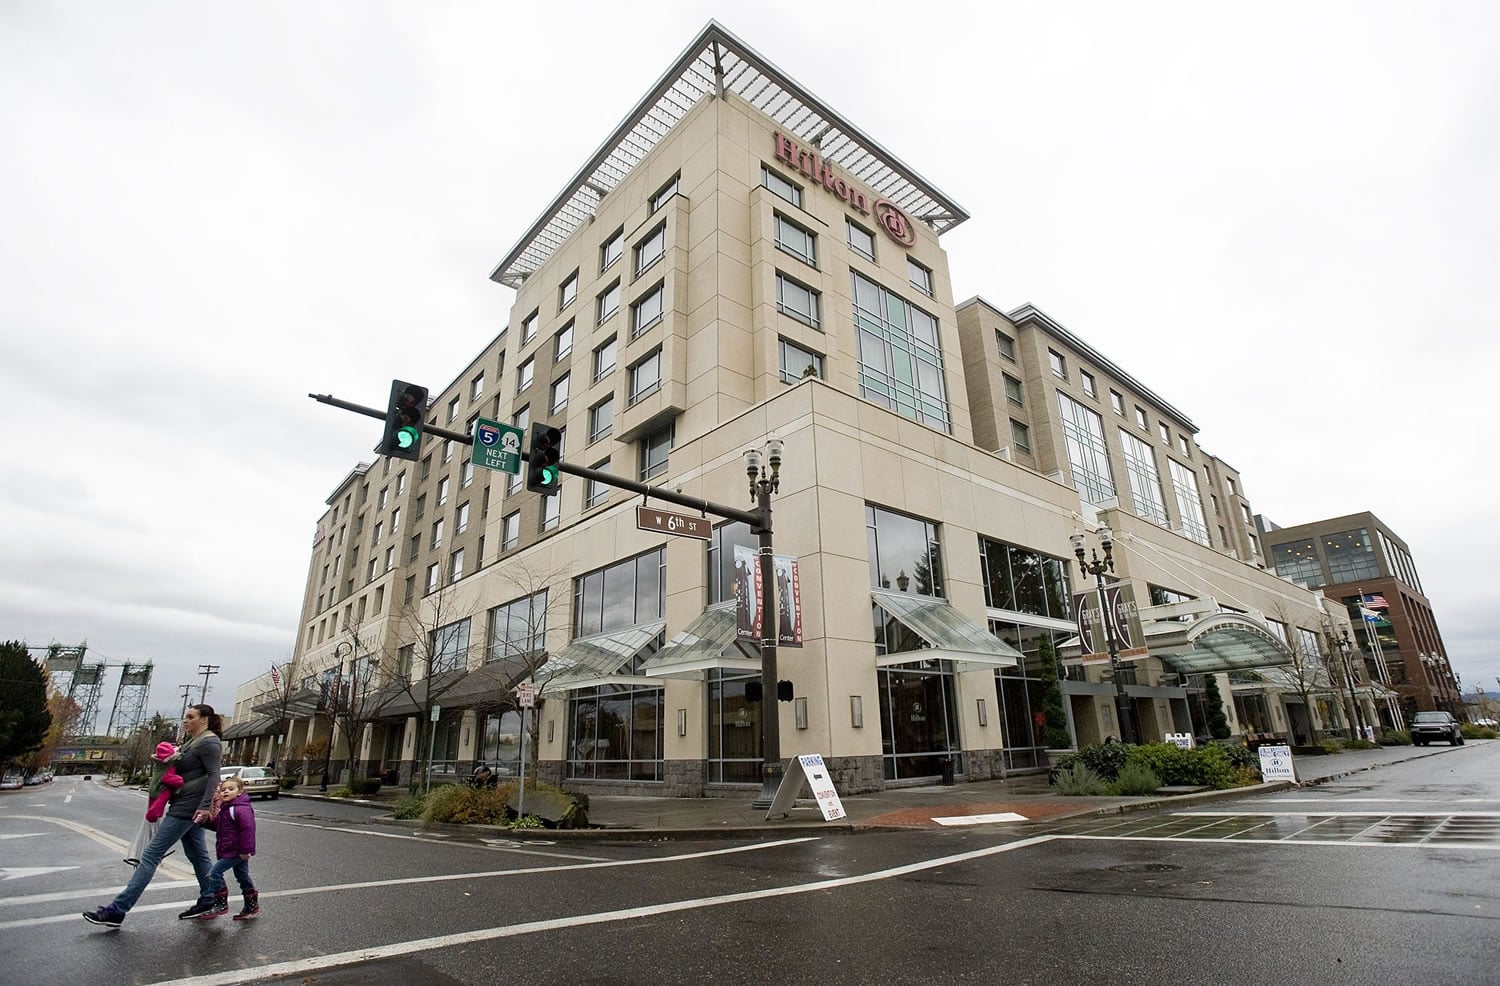 The city's lodging tax, collected on room nights stayed, was enough to help pay for the Hilton Vancouver Washington and fund community events.